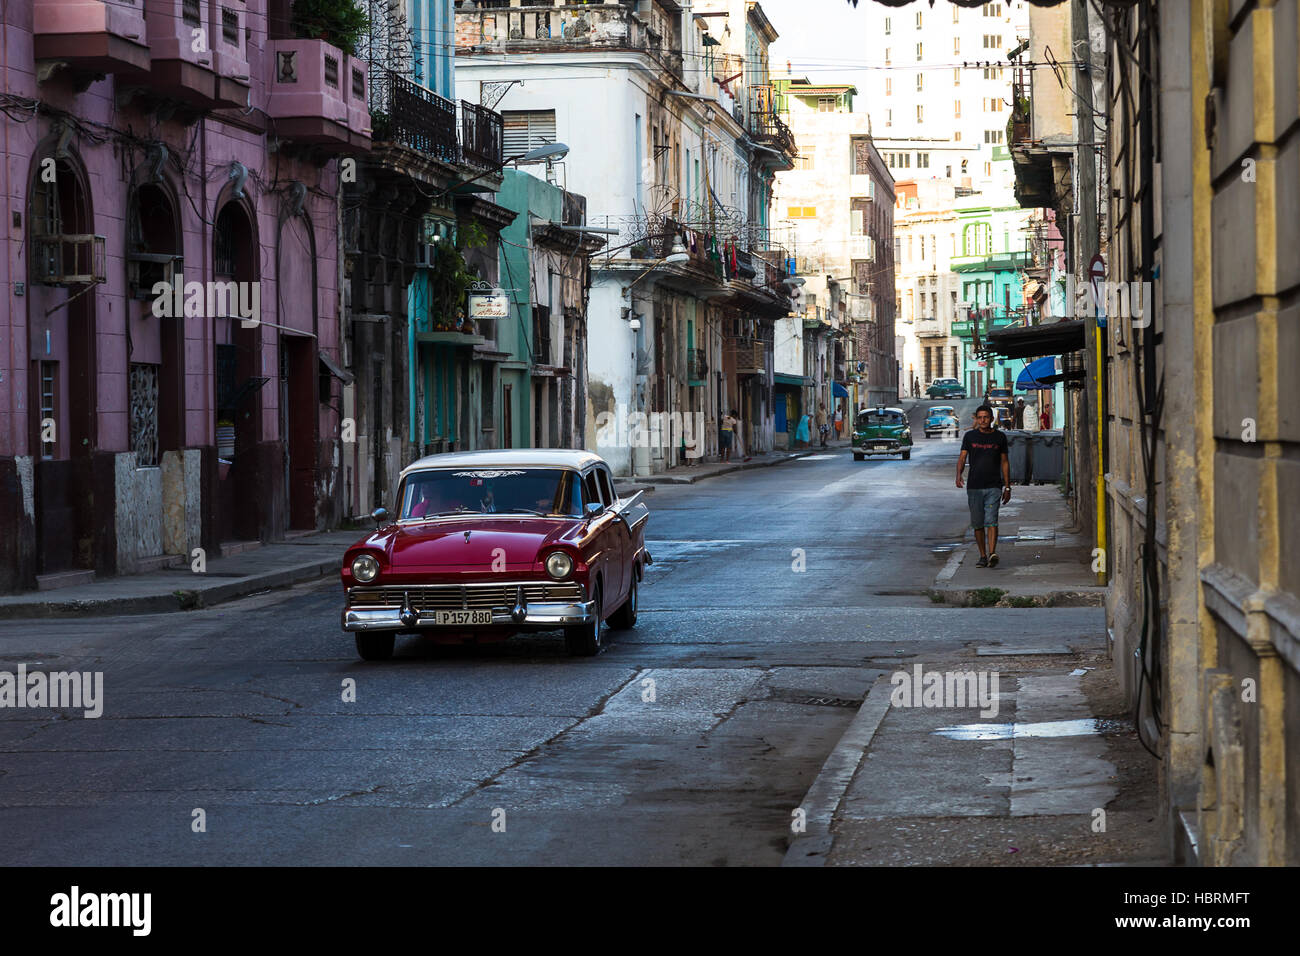 A red classical car traveling through the streets of Centro Habana early one morning. Stock Photo